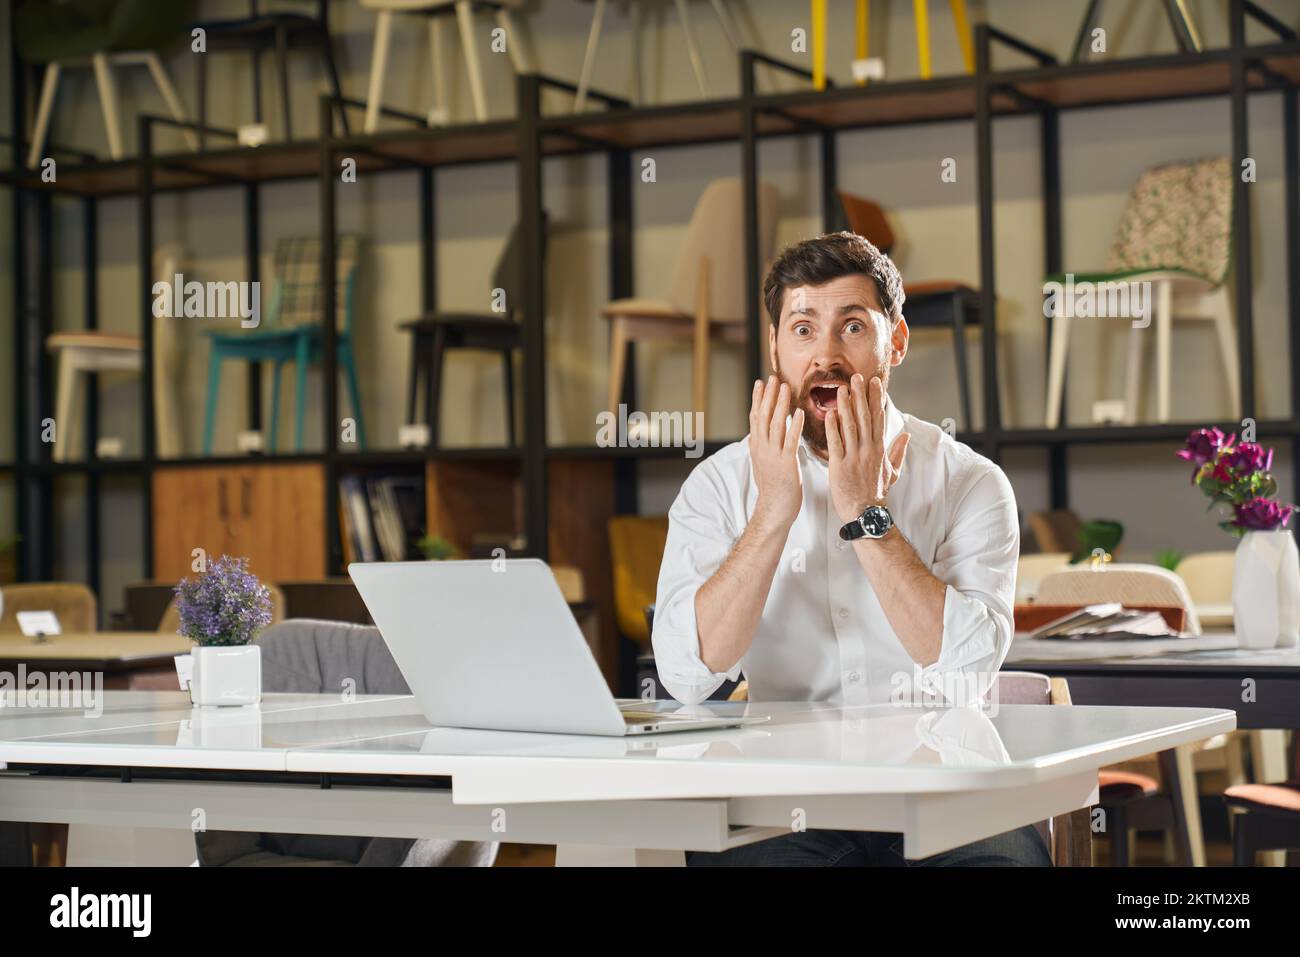 Amazed manager in white shirt browsing on laptop in furniture store. Portrait of shocked male retailer find out of profit results or career opportunities, while working indoors. Concept of emotions. Stock Photo